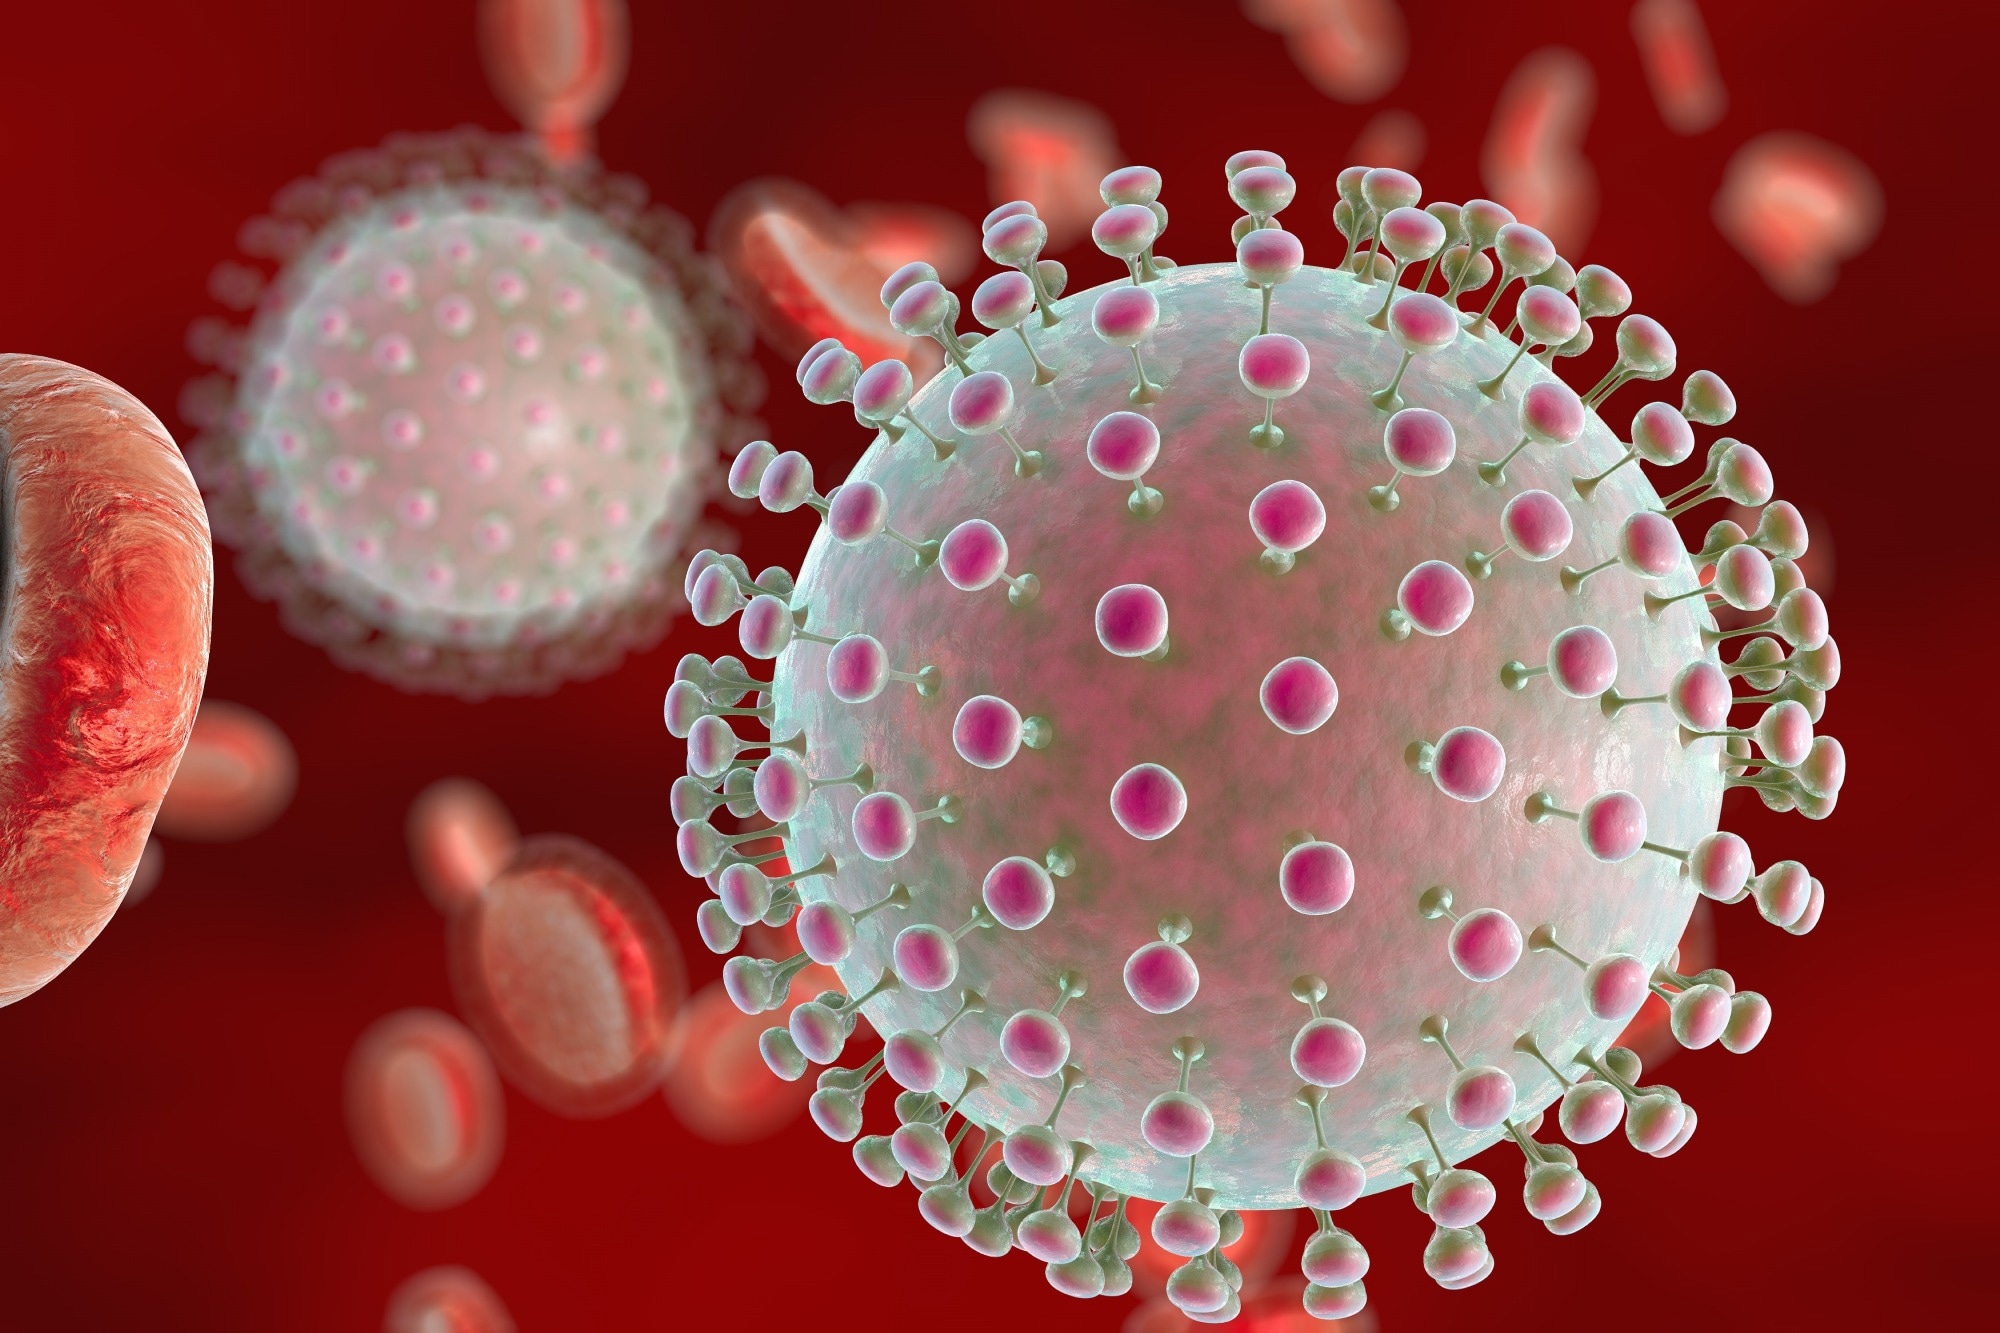 Study: Zika virus dumbbell-1 structure is critical for sfRNA presence and cytopathic effect during infection. Image Credit: Kateryna Kon/Shutterstock